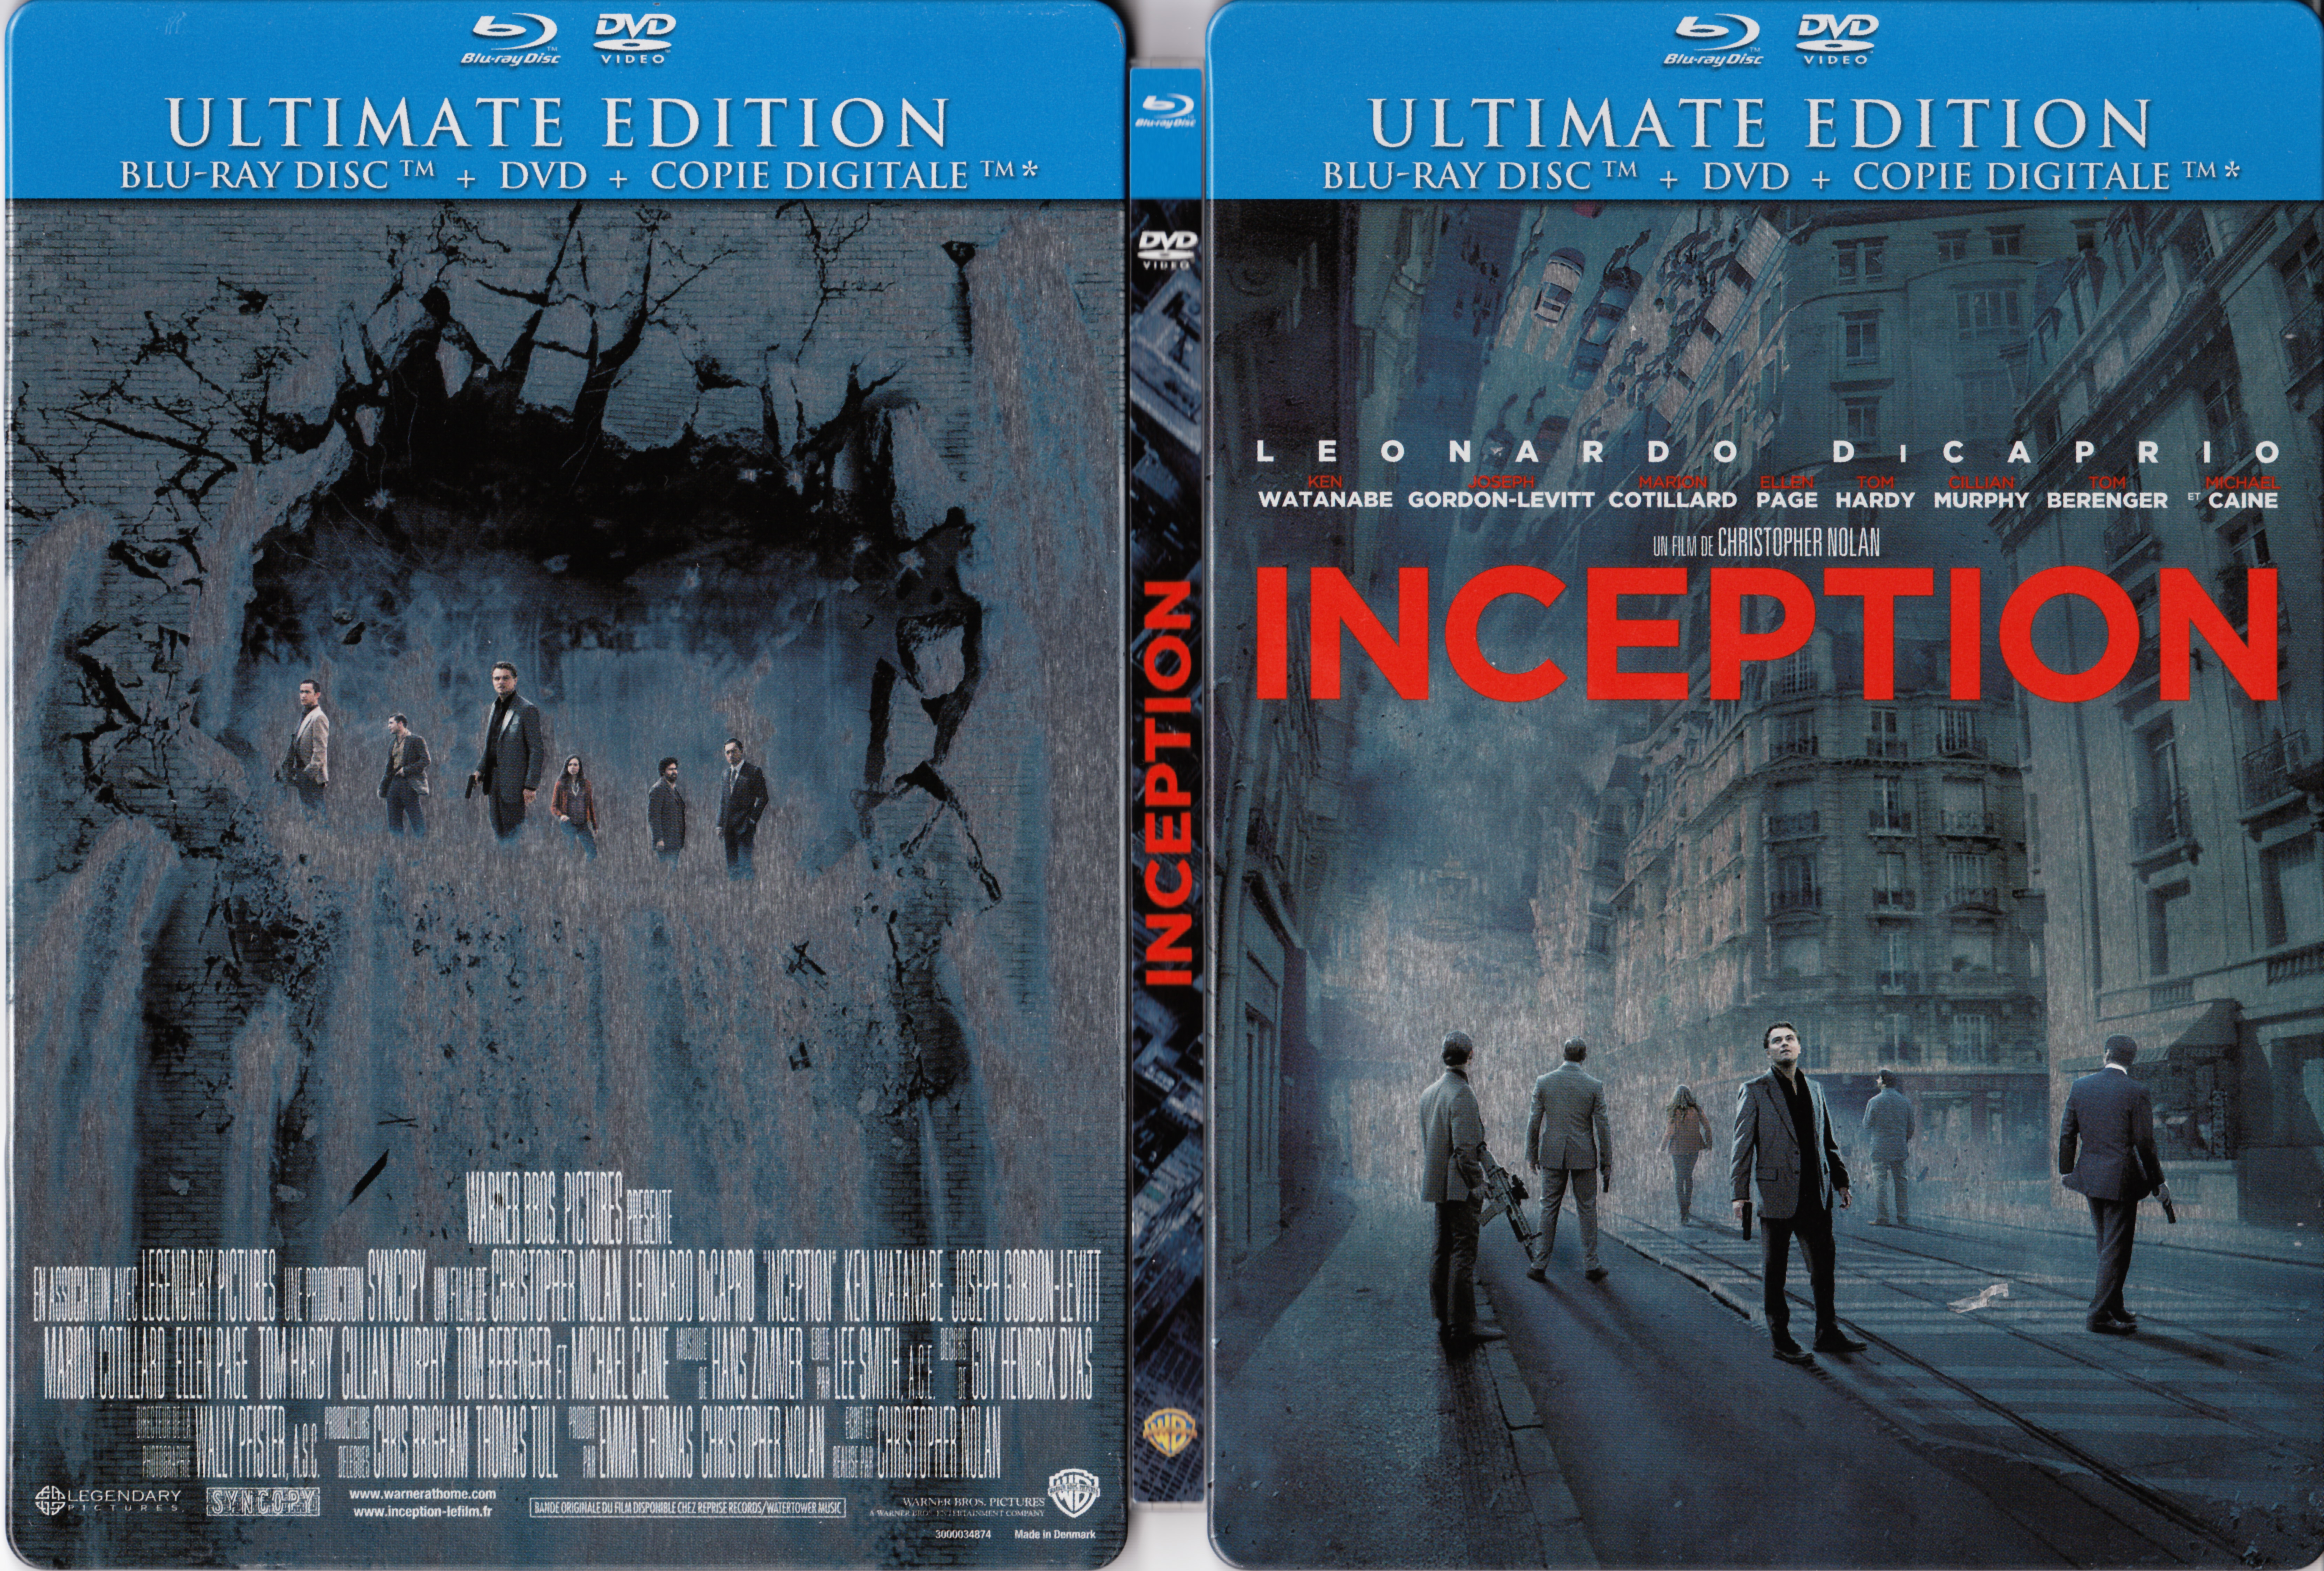 Jaquette DVD Inception (BLU-RAY)